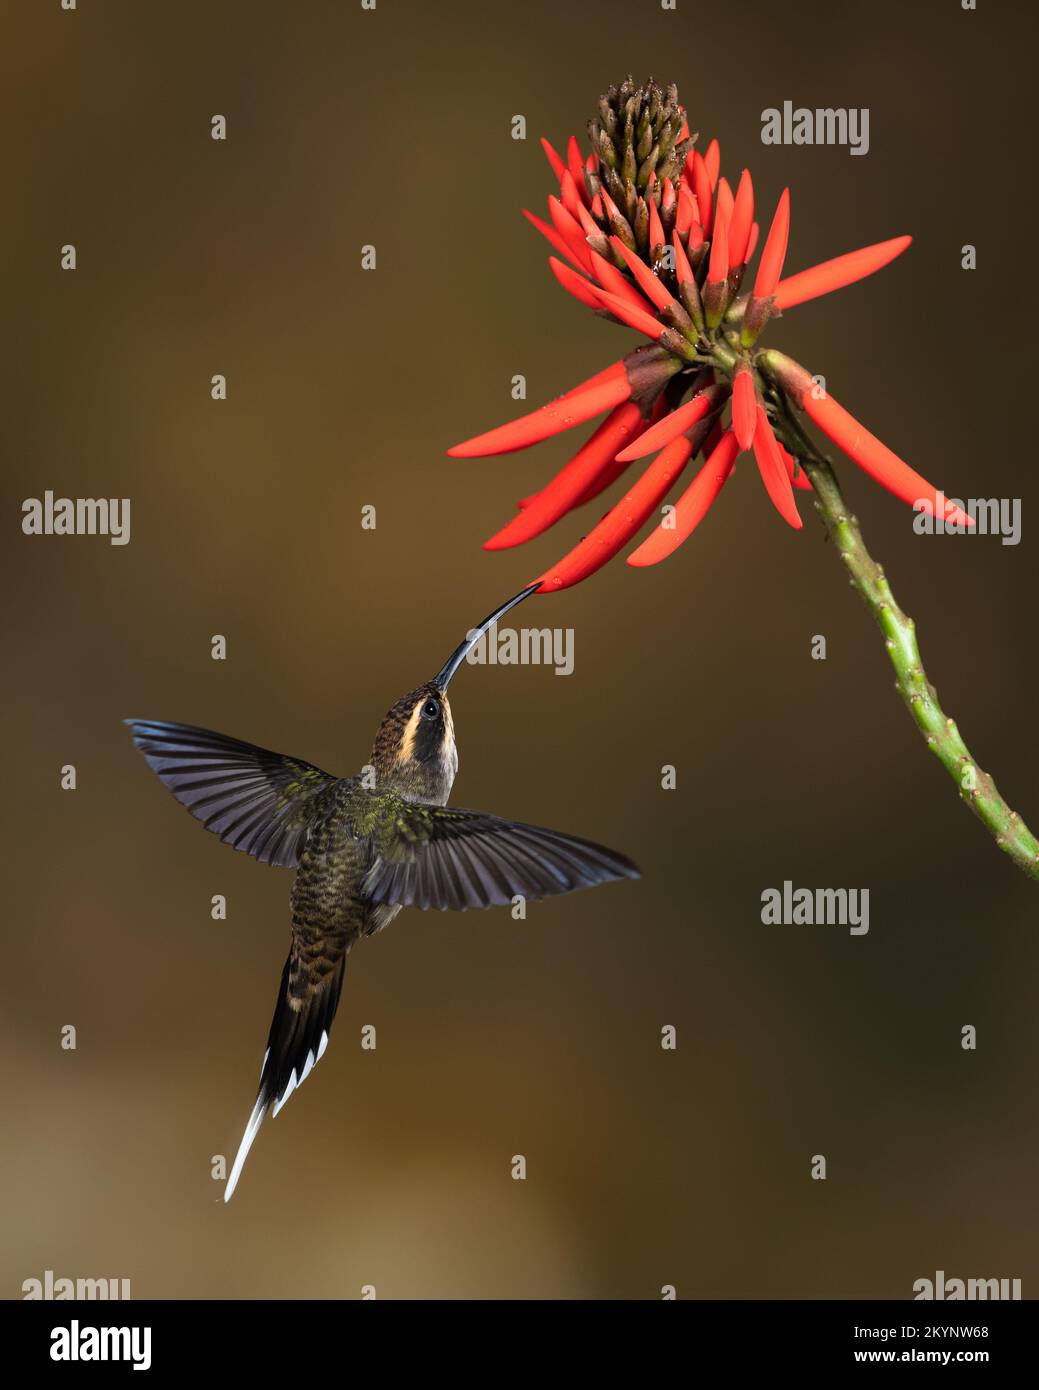 A Scale-throated Hermit (Phaethornis eurynome) visiting a native flower from the Atlantic Rainforest of SE Brazil Stock Photo